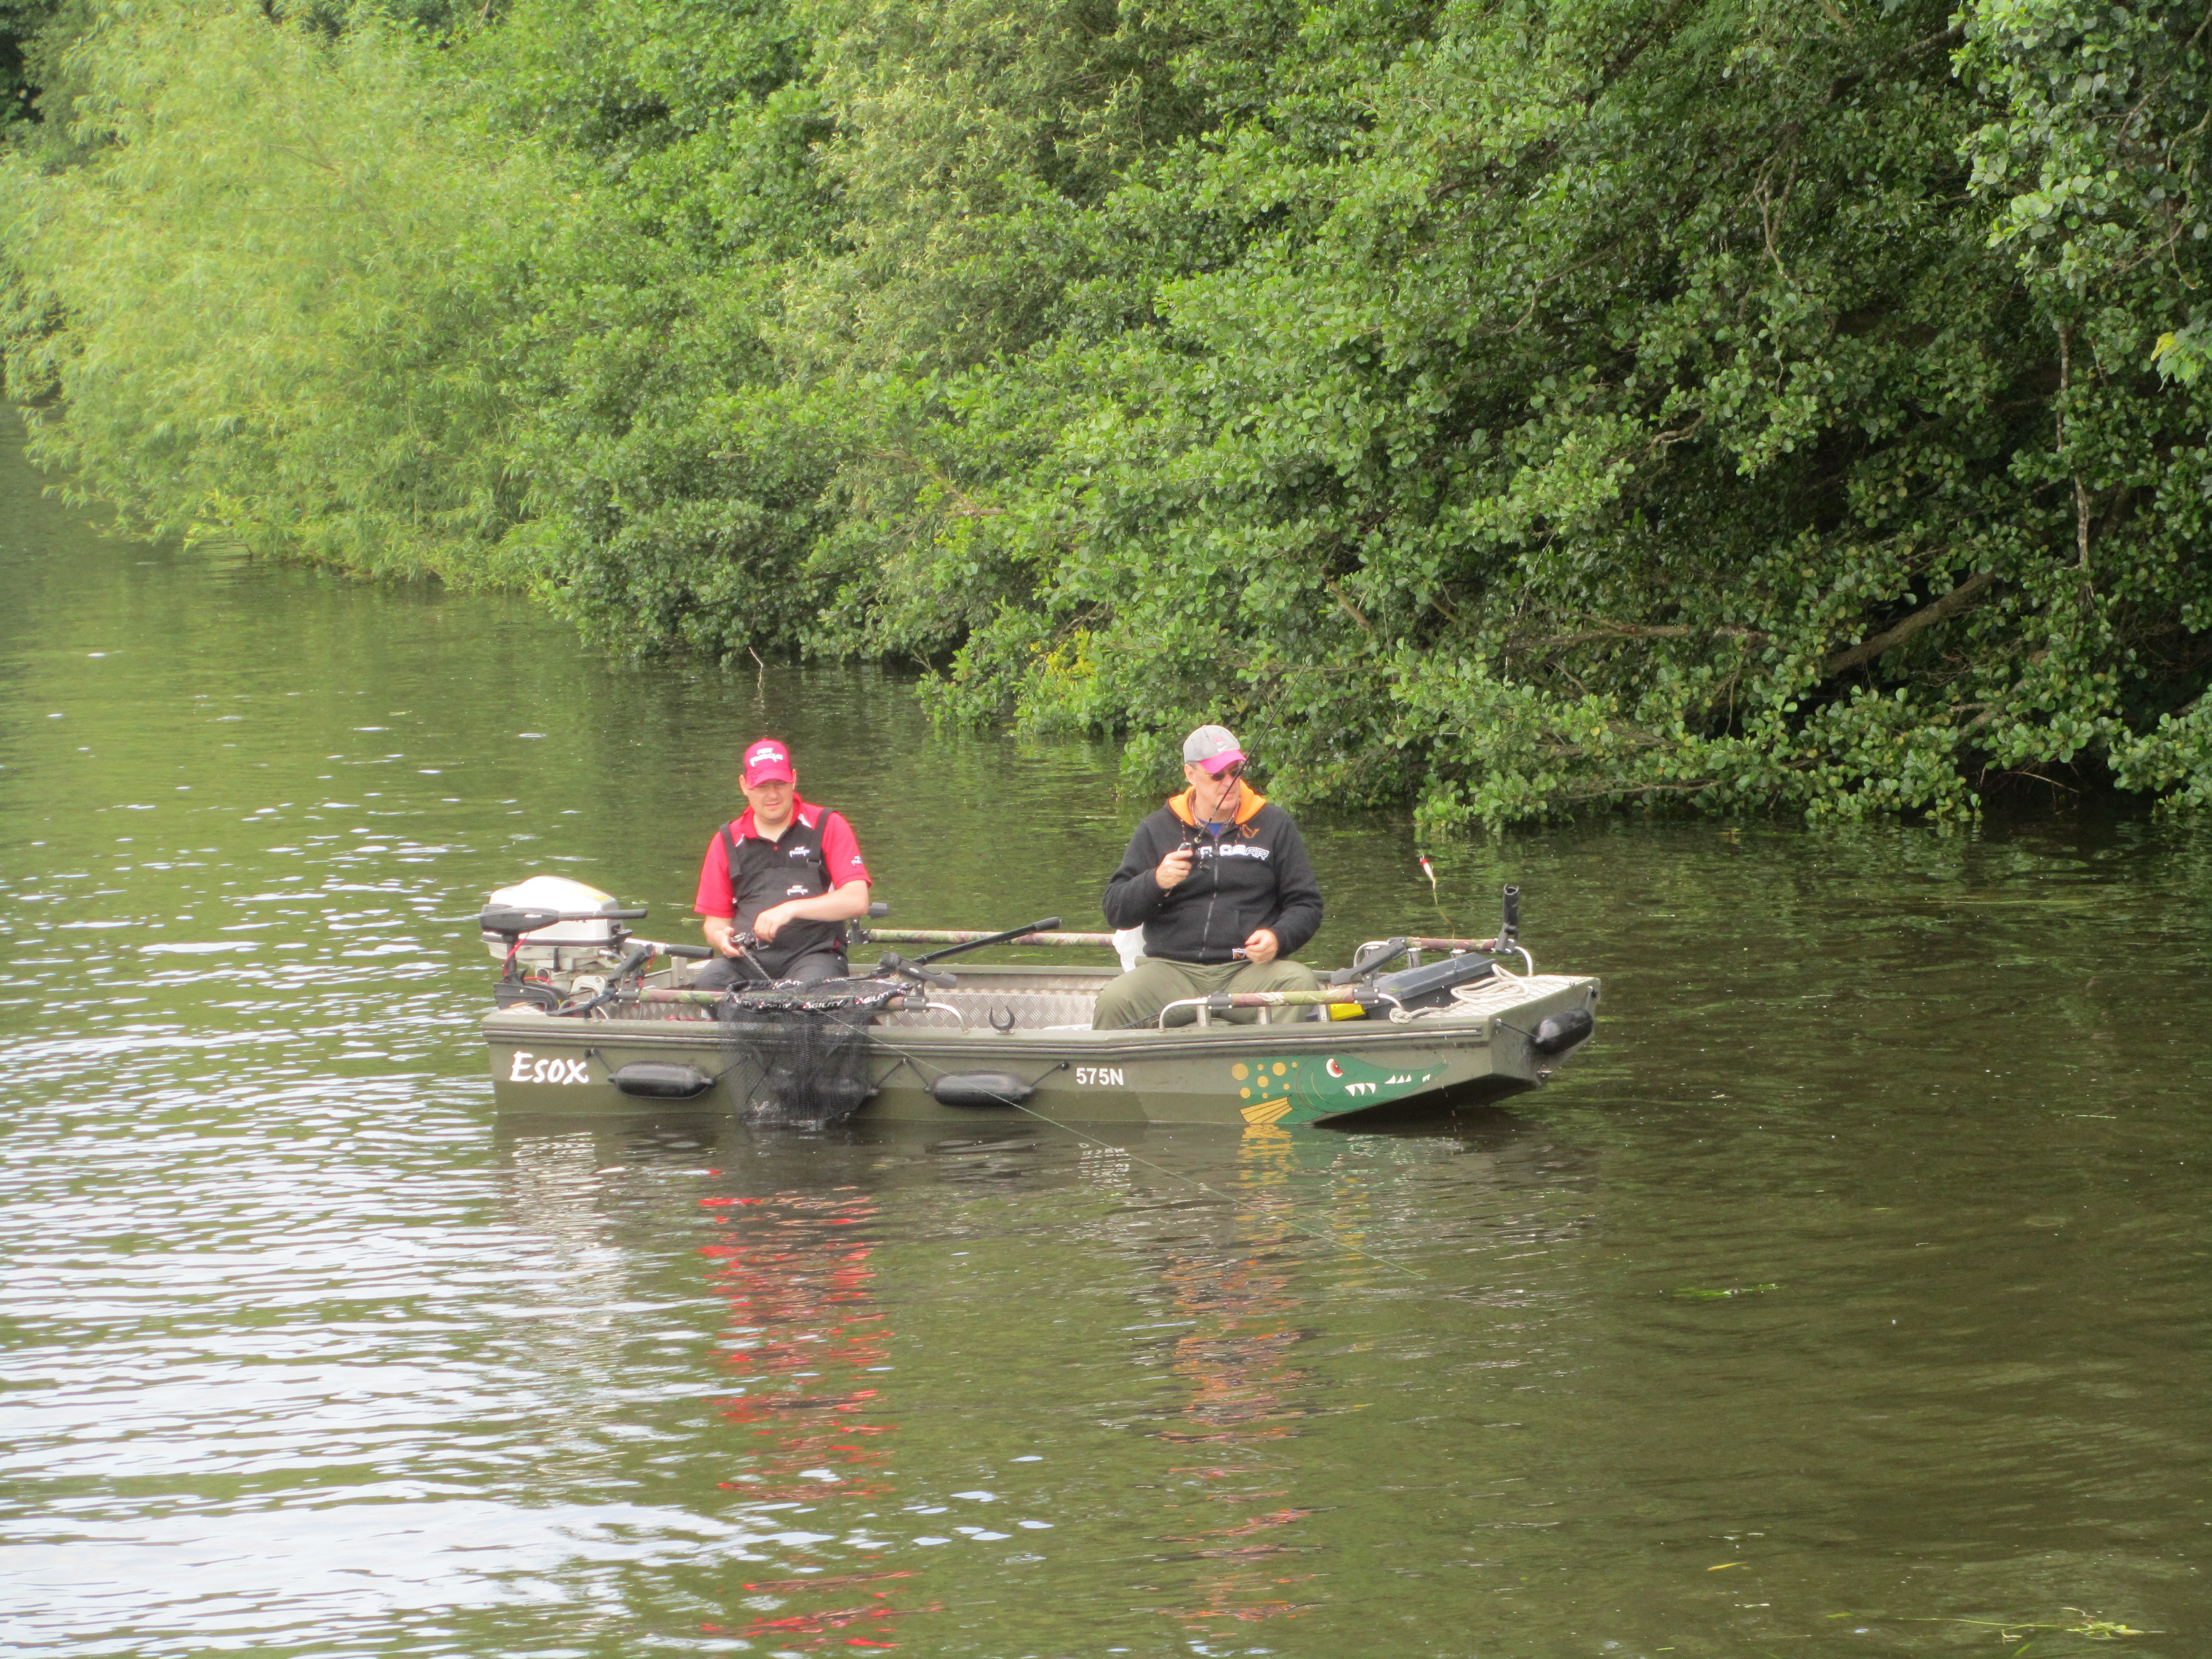 two men in a motor boat are fishing over the sides